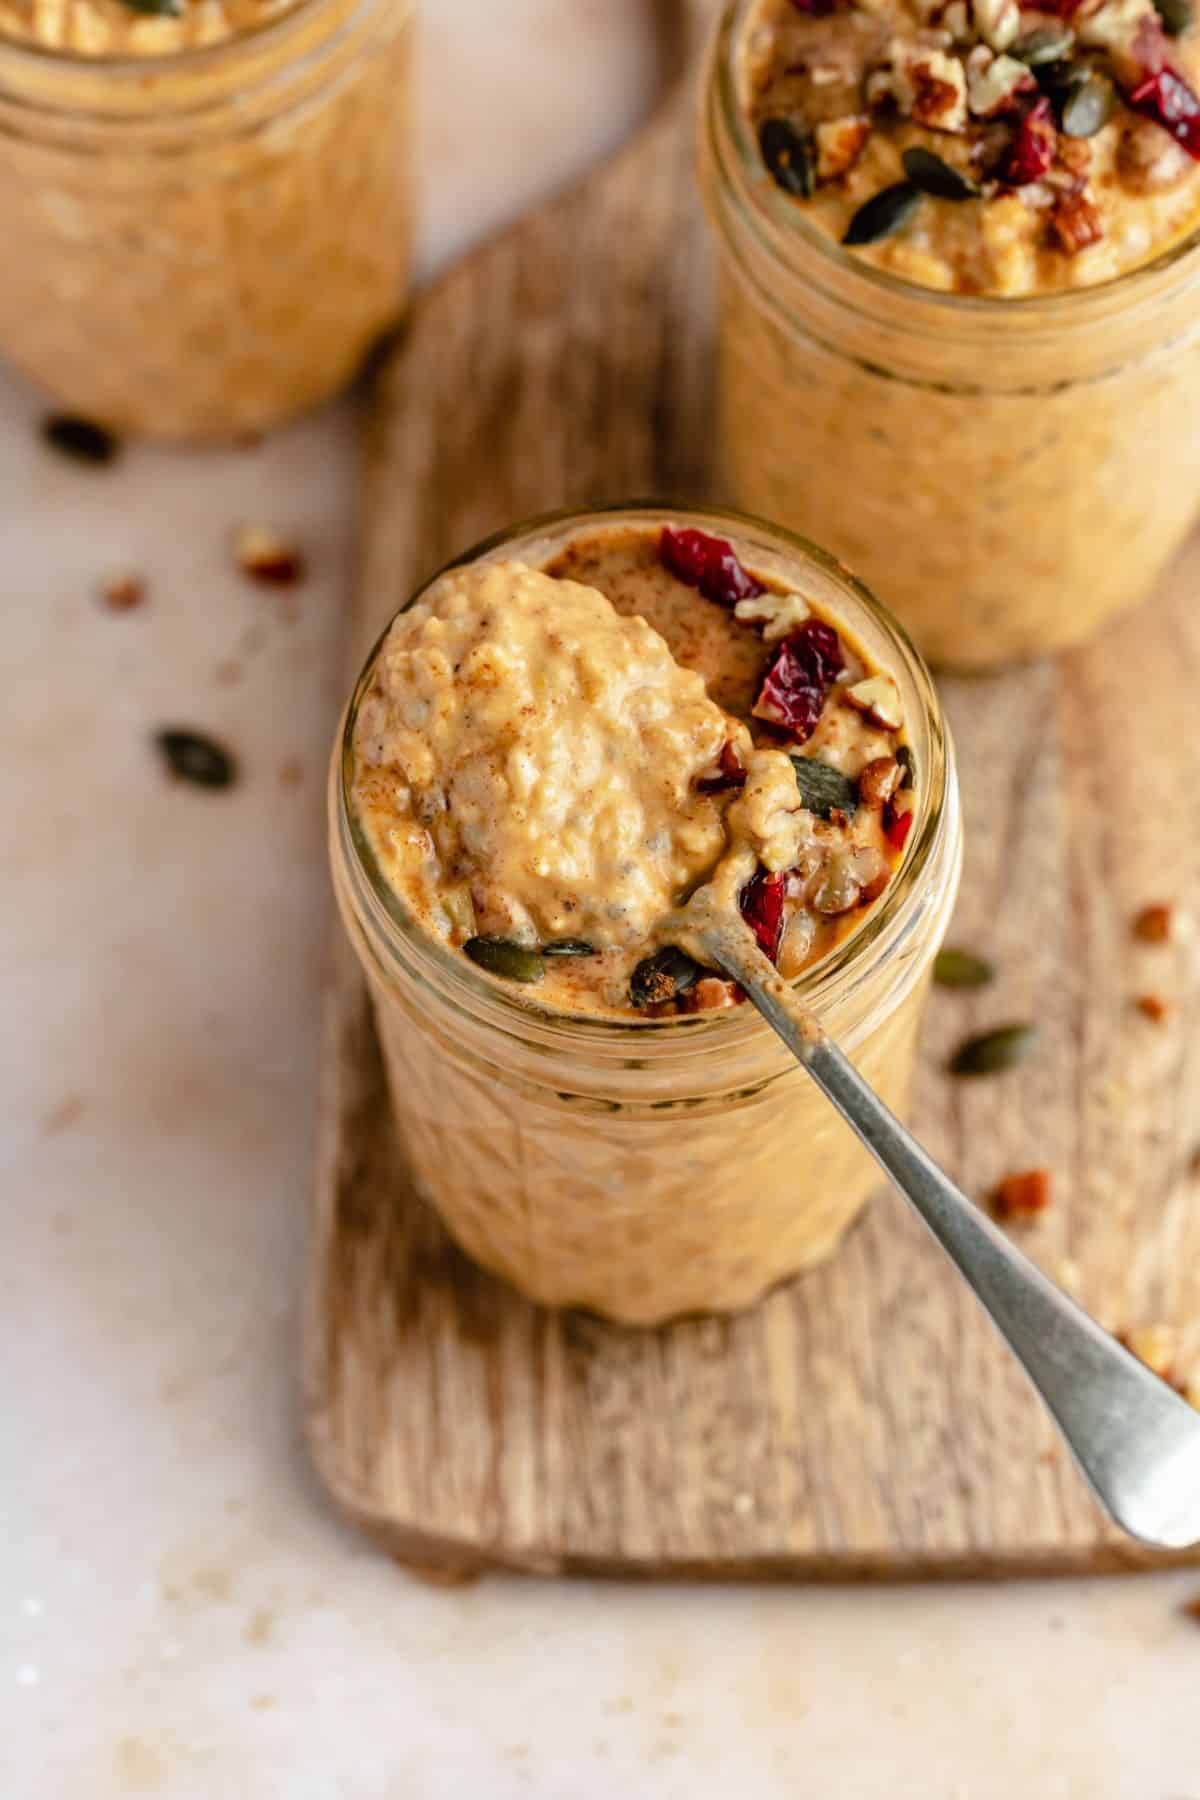 Overnight oats made with pumpkin topped with pumpkin seeds and cranberries.